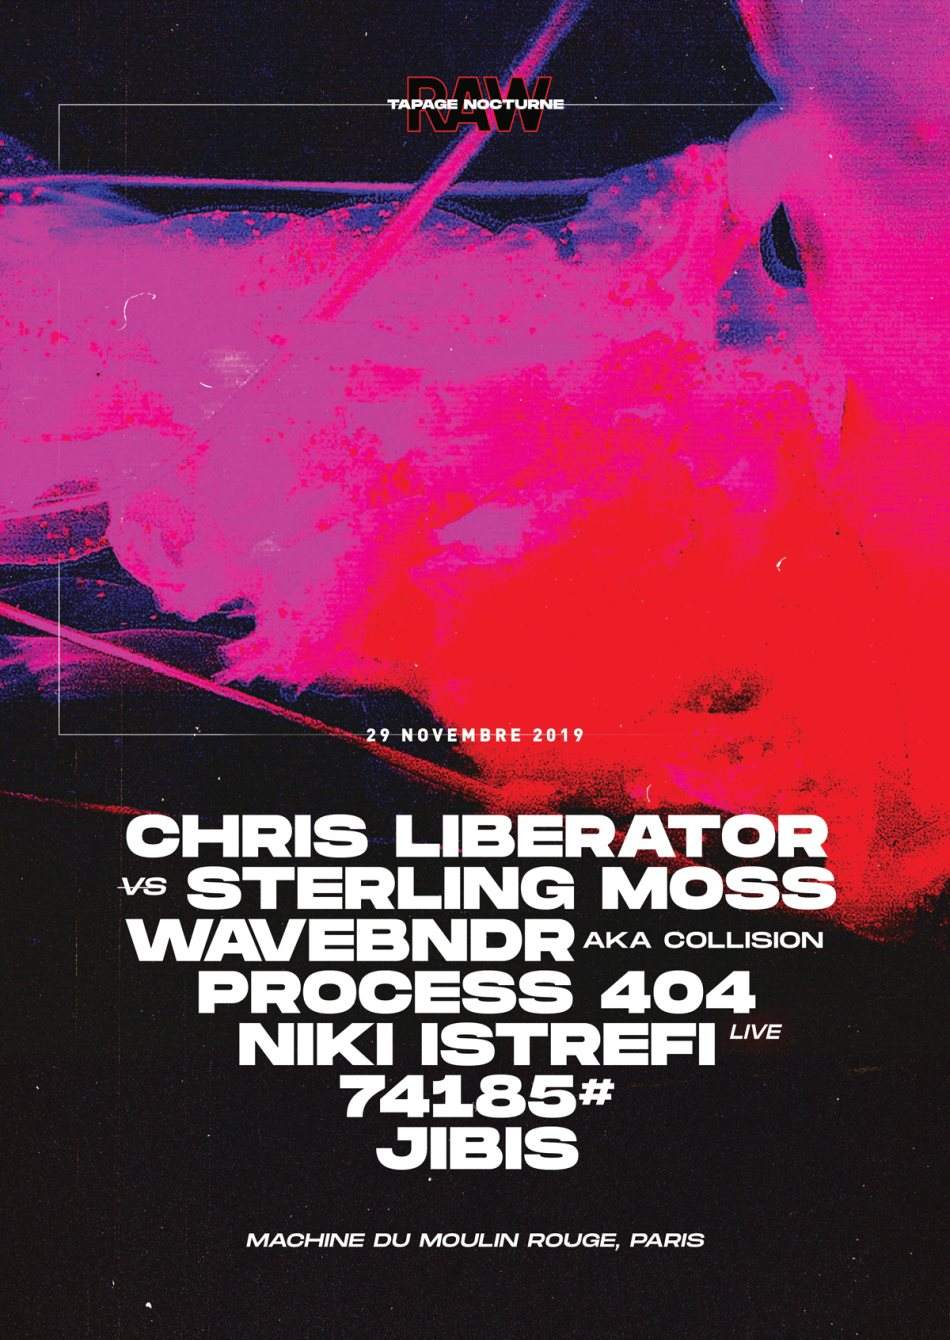 RAW x Tapage Nocturne - Chris Liberator vs Sterling Moss & More - Flyer front